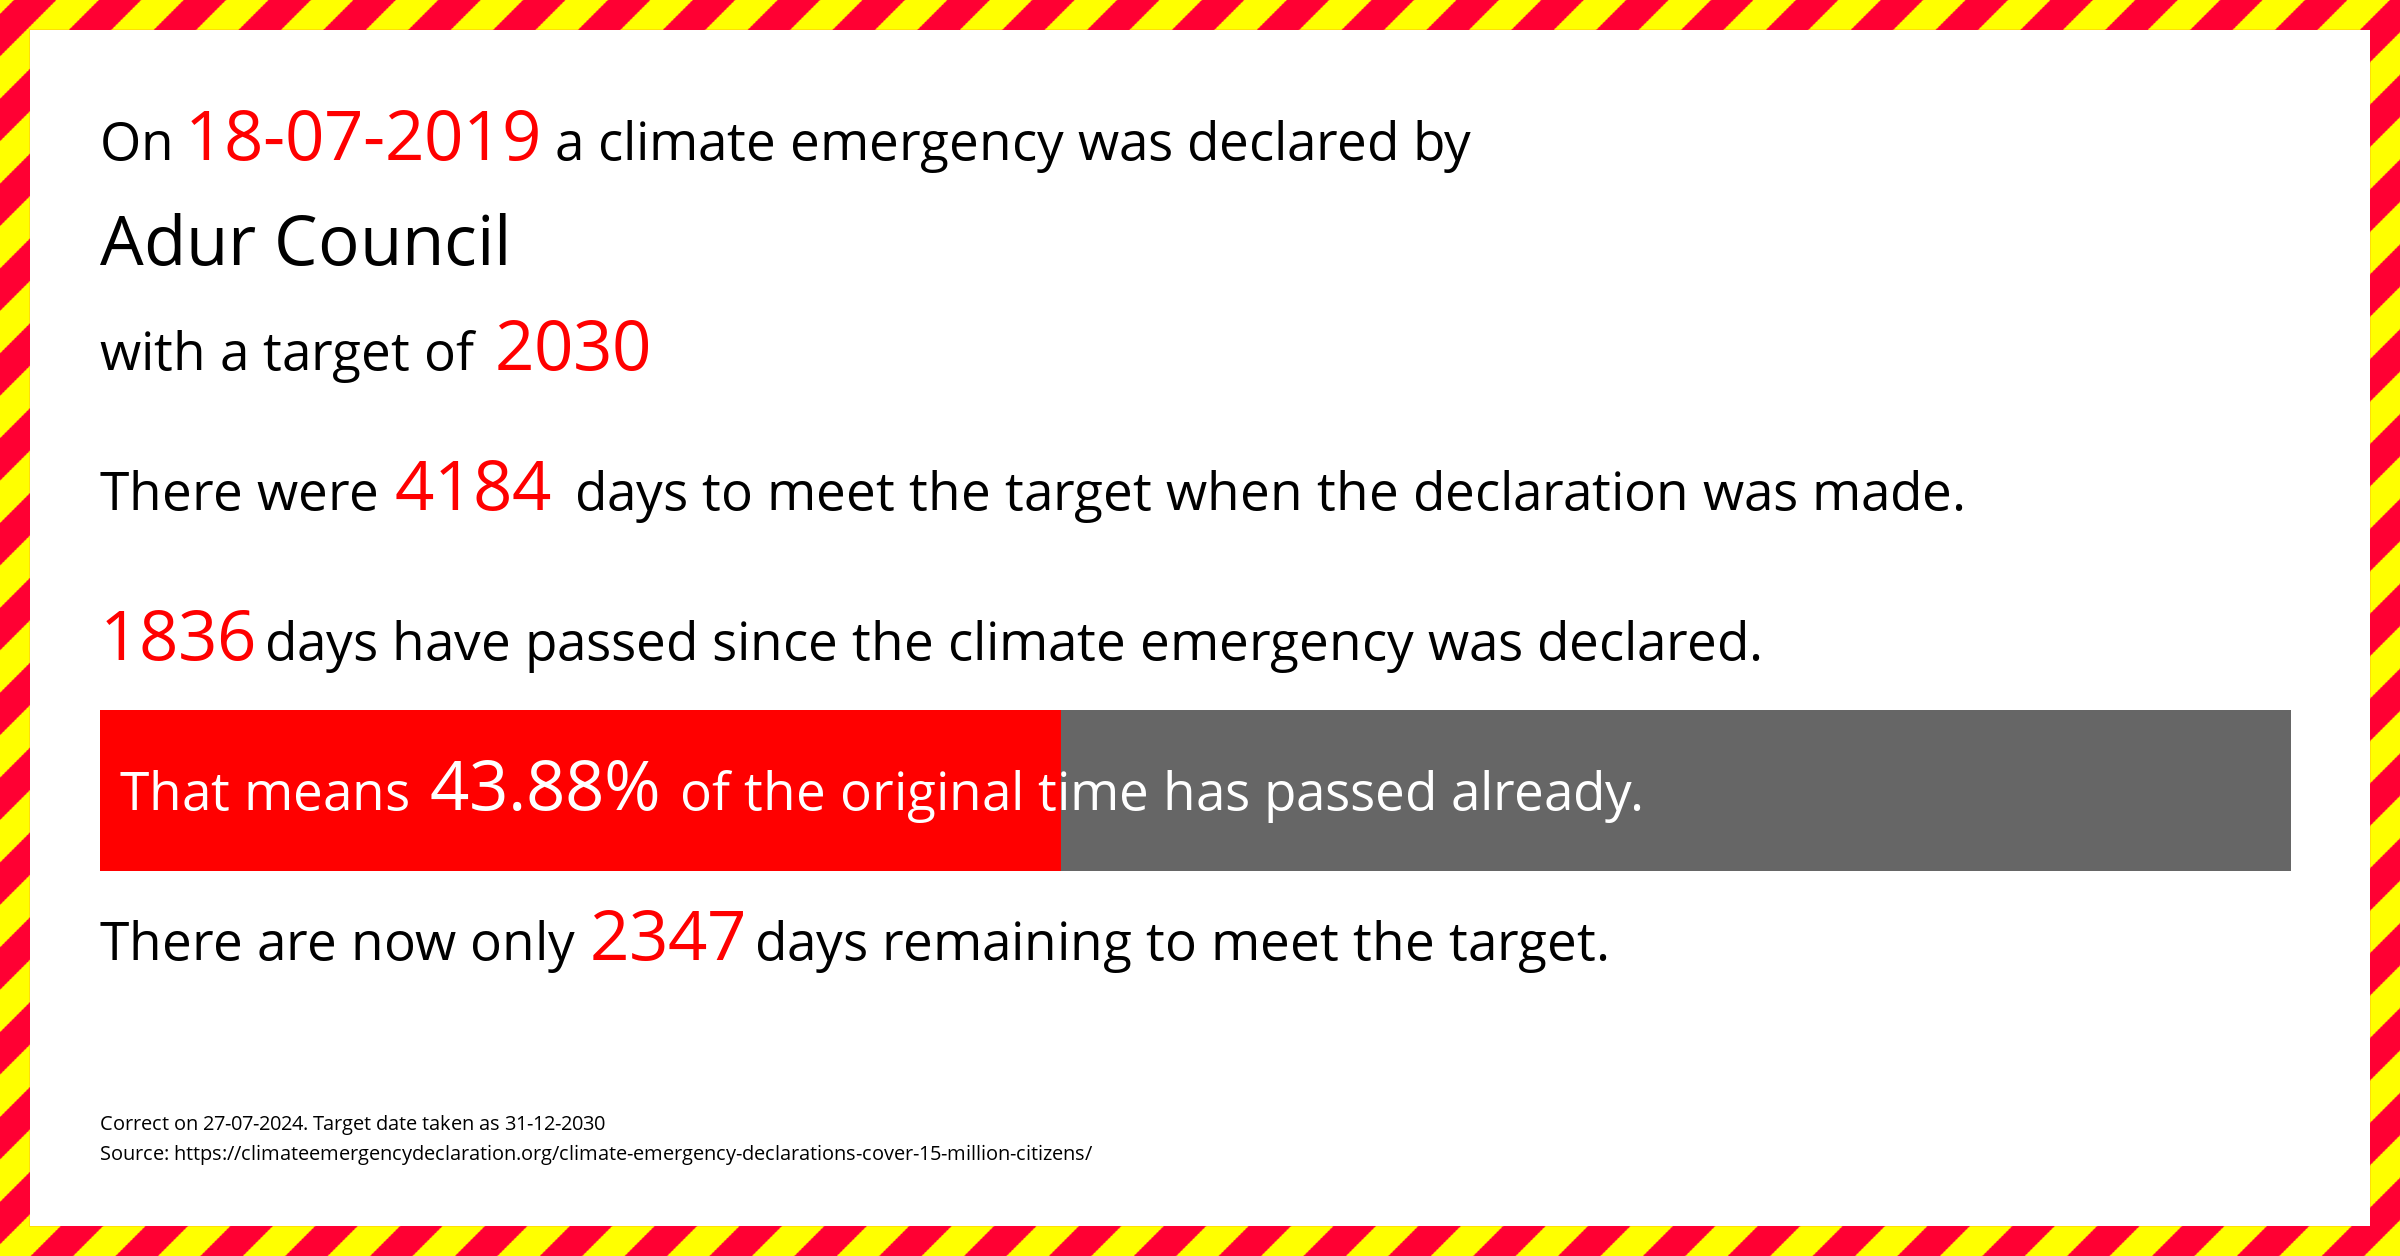 Adur Council declared a Climate emergency on Thursday 18th July 2019, with a target of 2030.